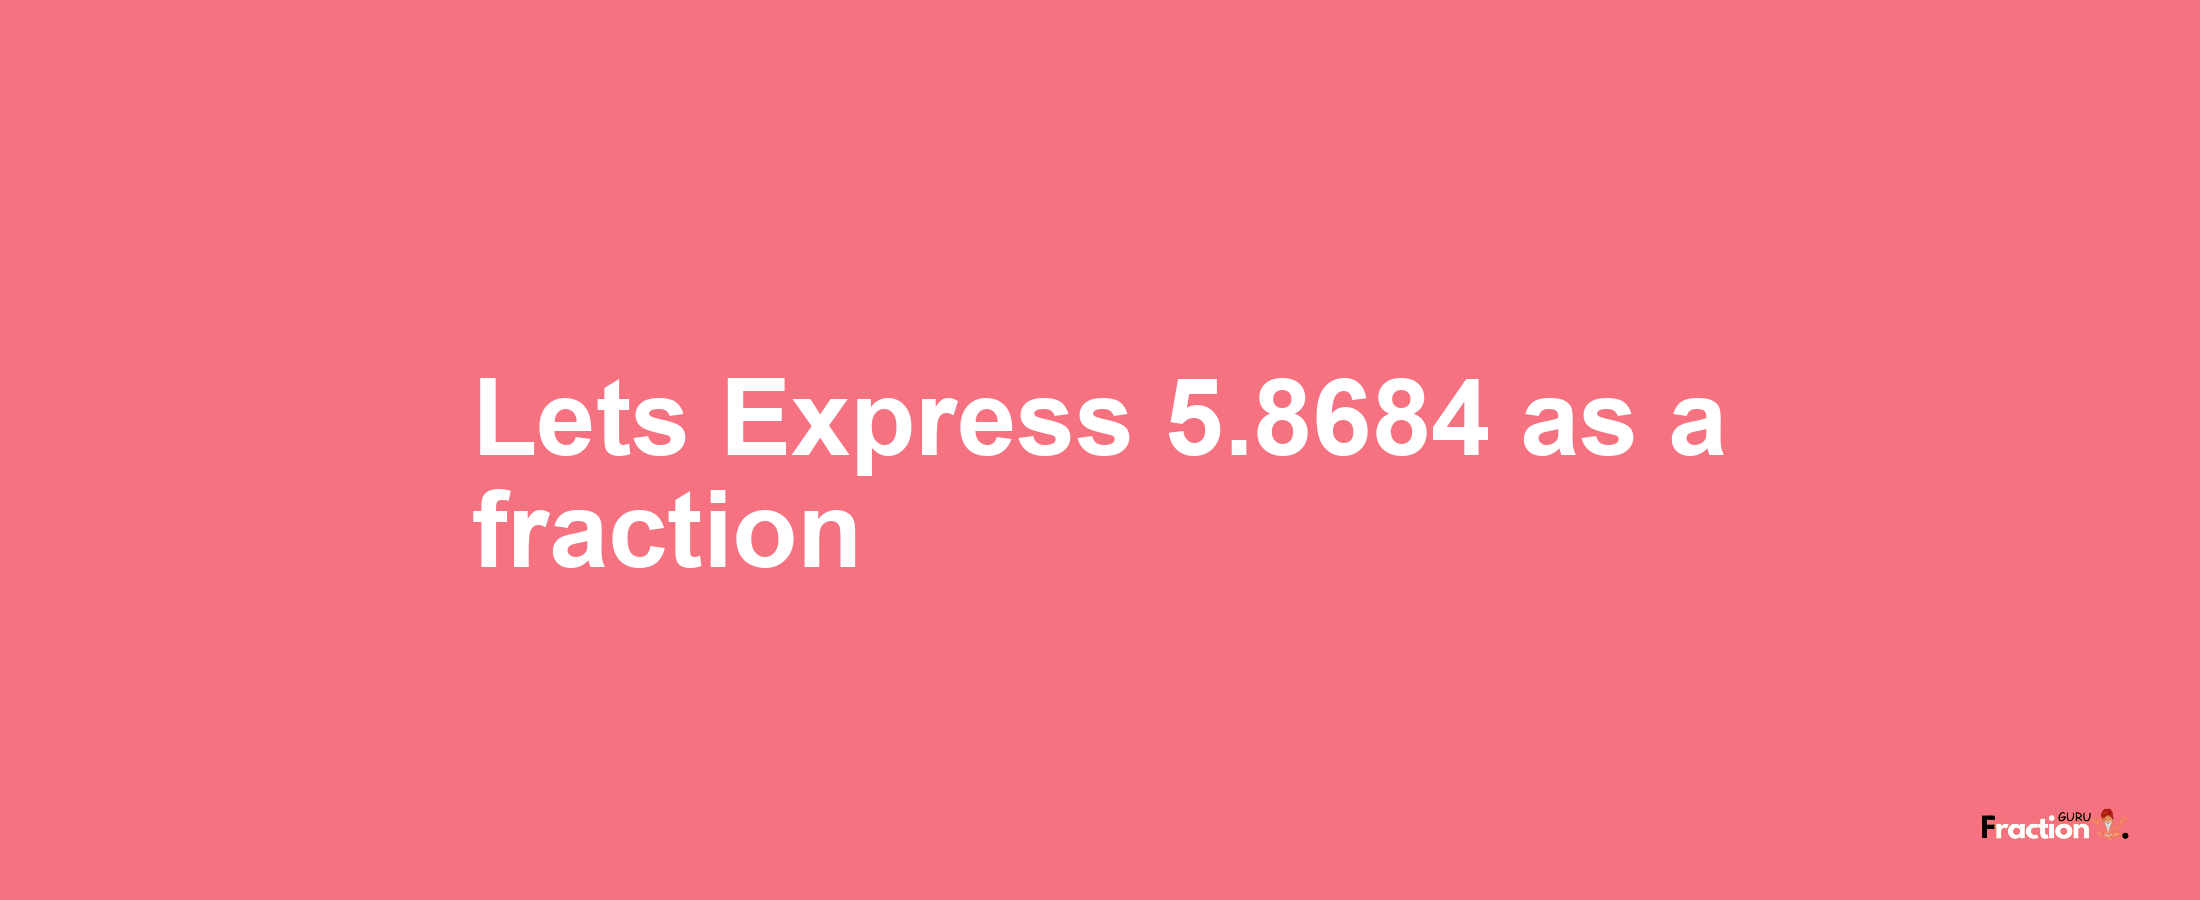 Lets Express 5.8684 as afraction